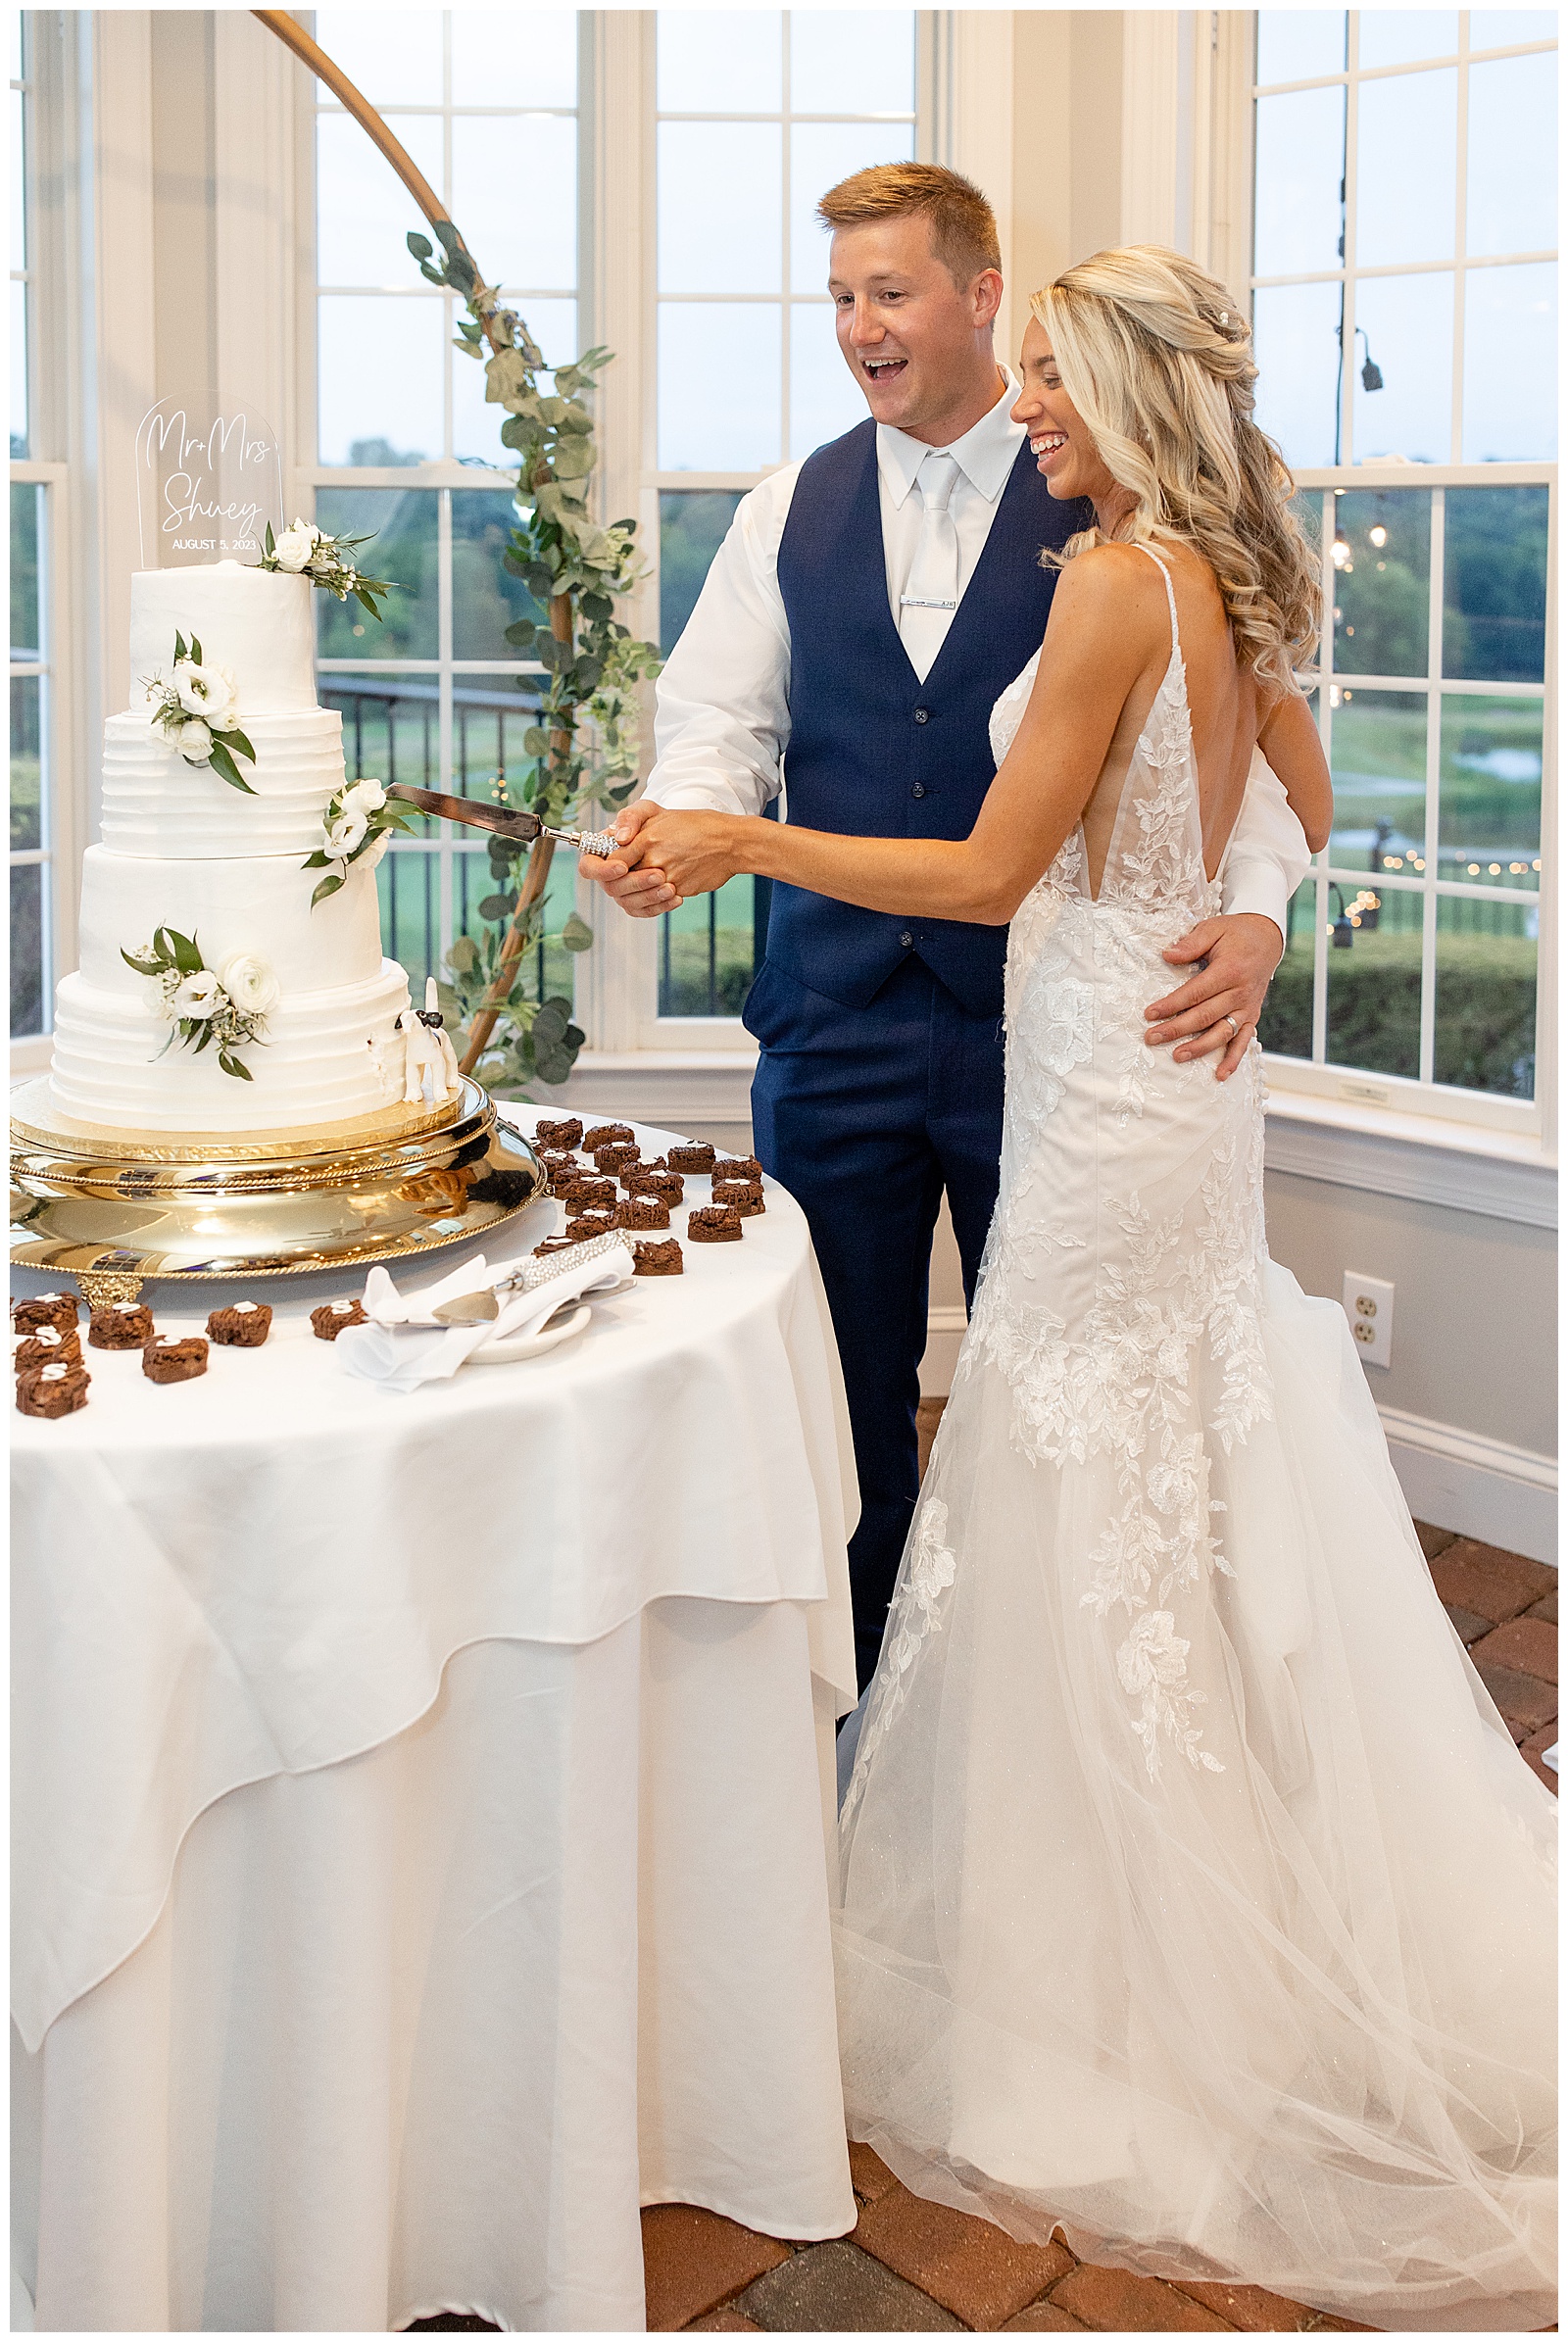 bride and groom cutting their wedding cake during their indoor reception at the links at gettysburg